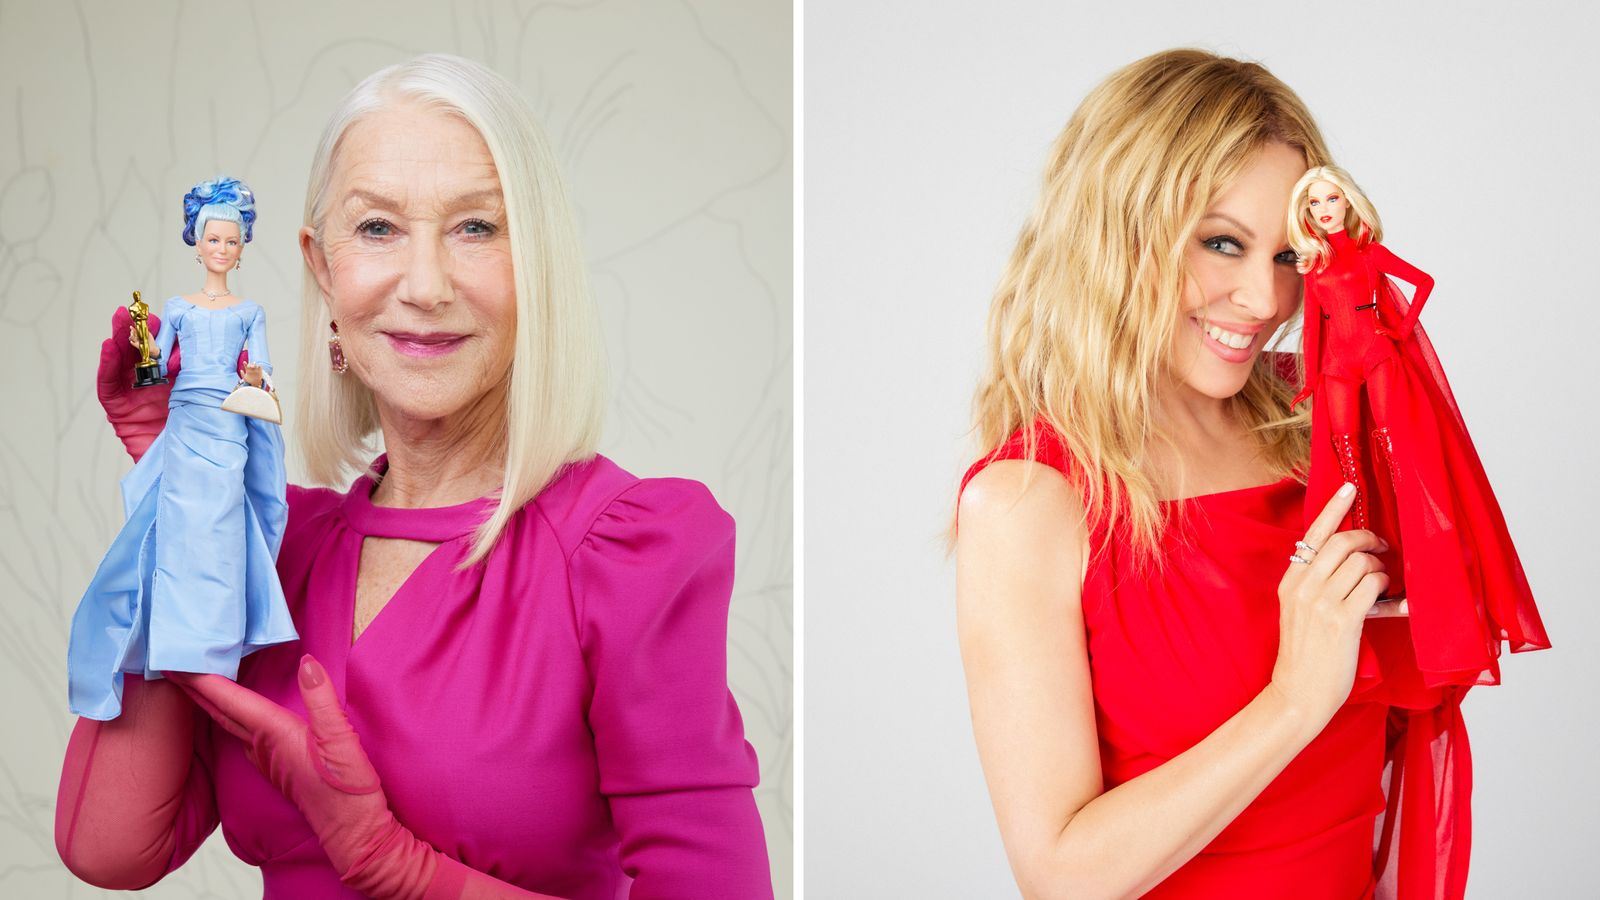 Helen Mirren and Kylie Minogue among those honoured with Barbie likeness